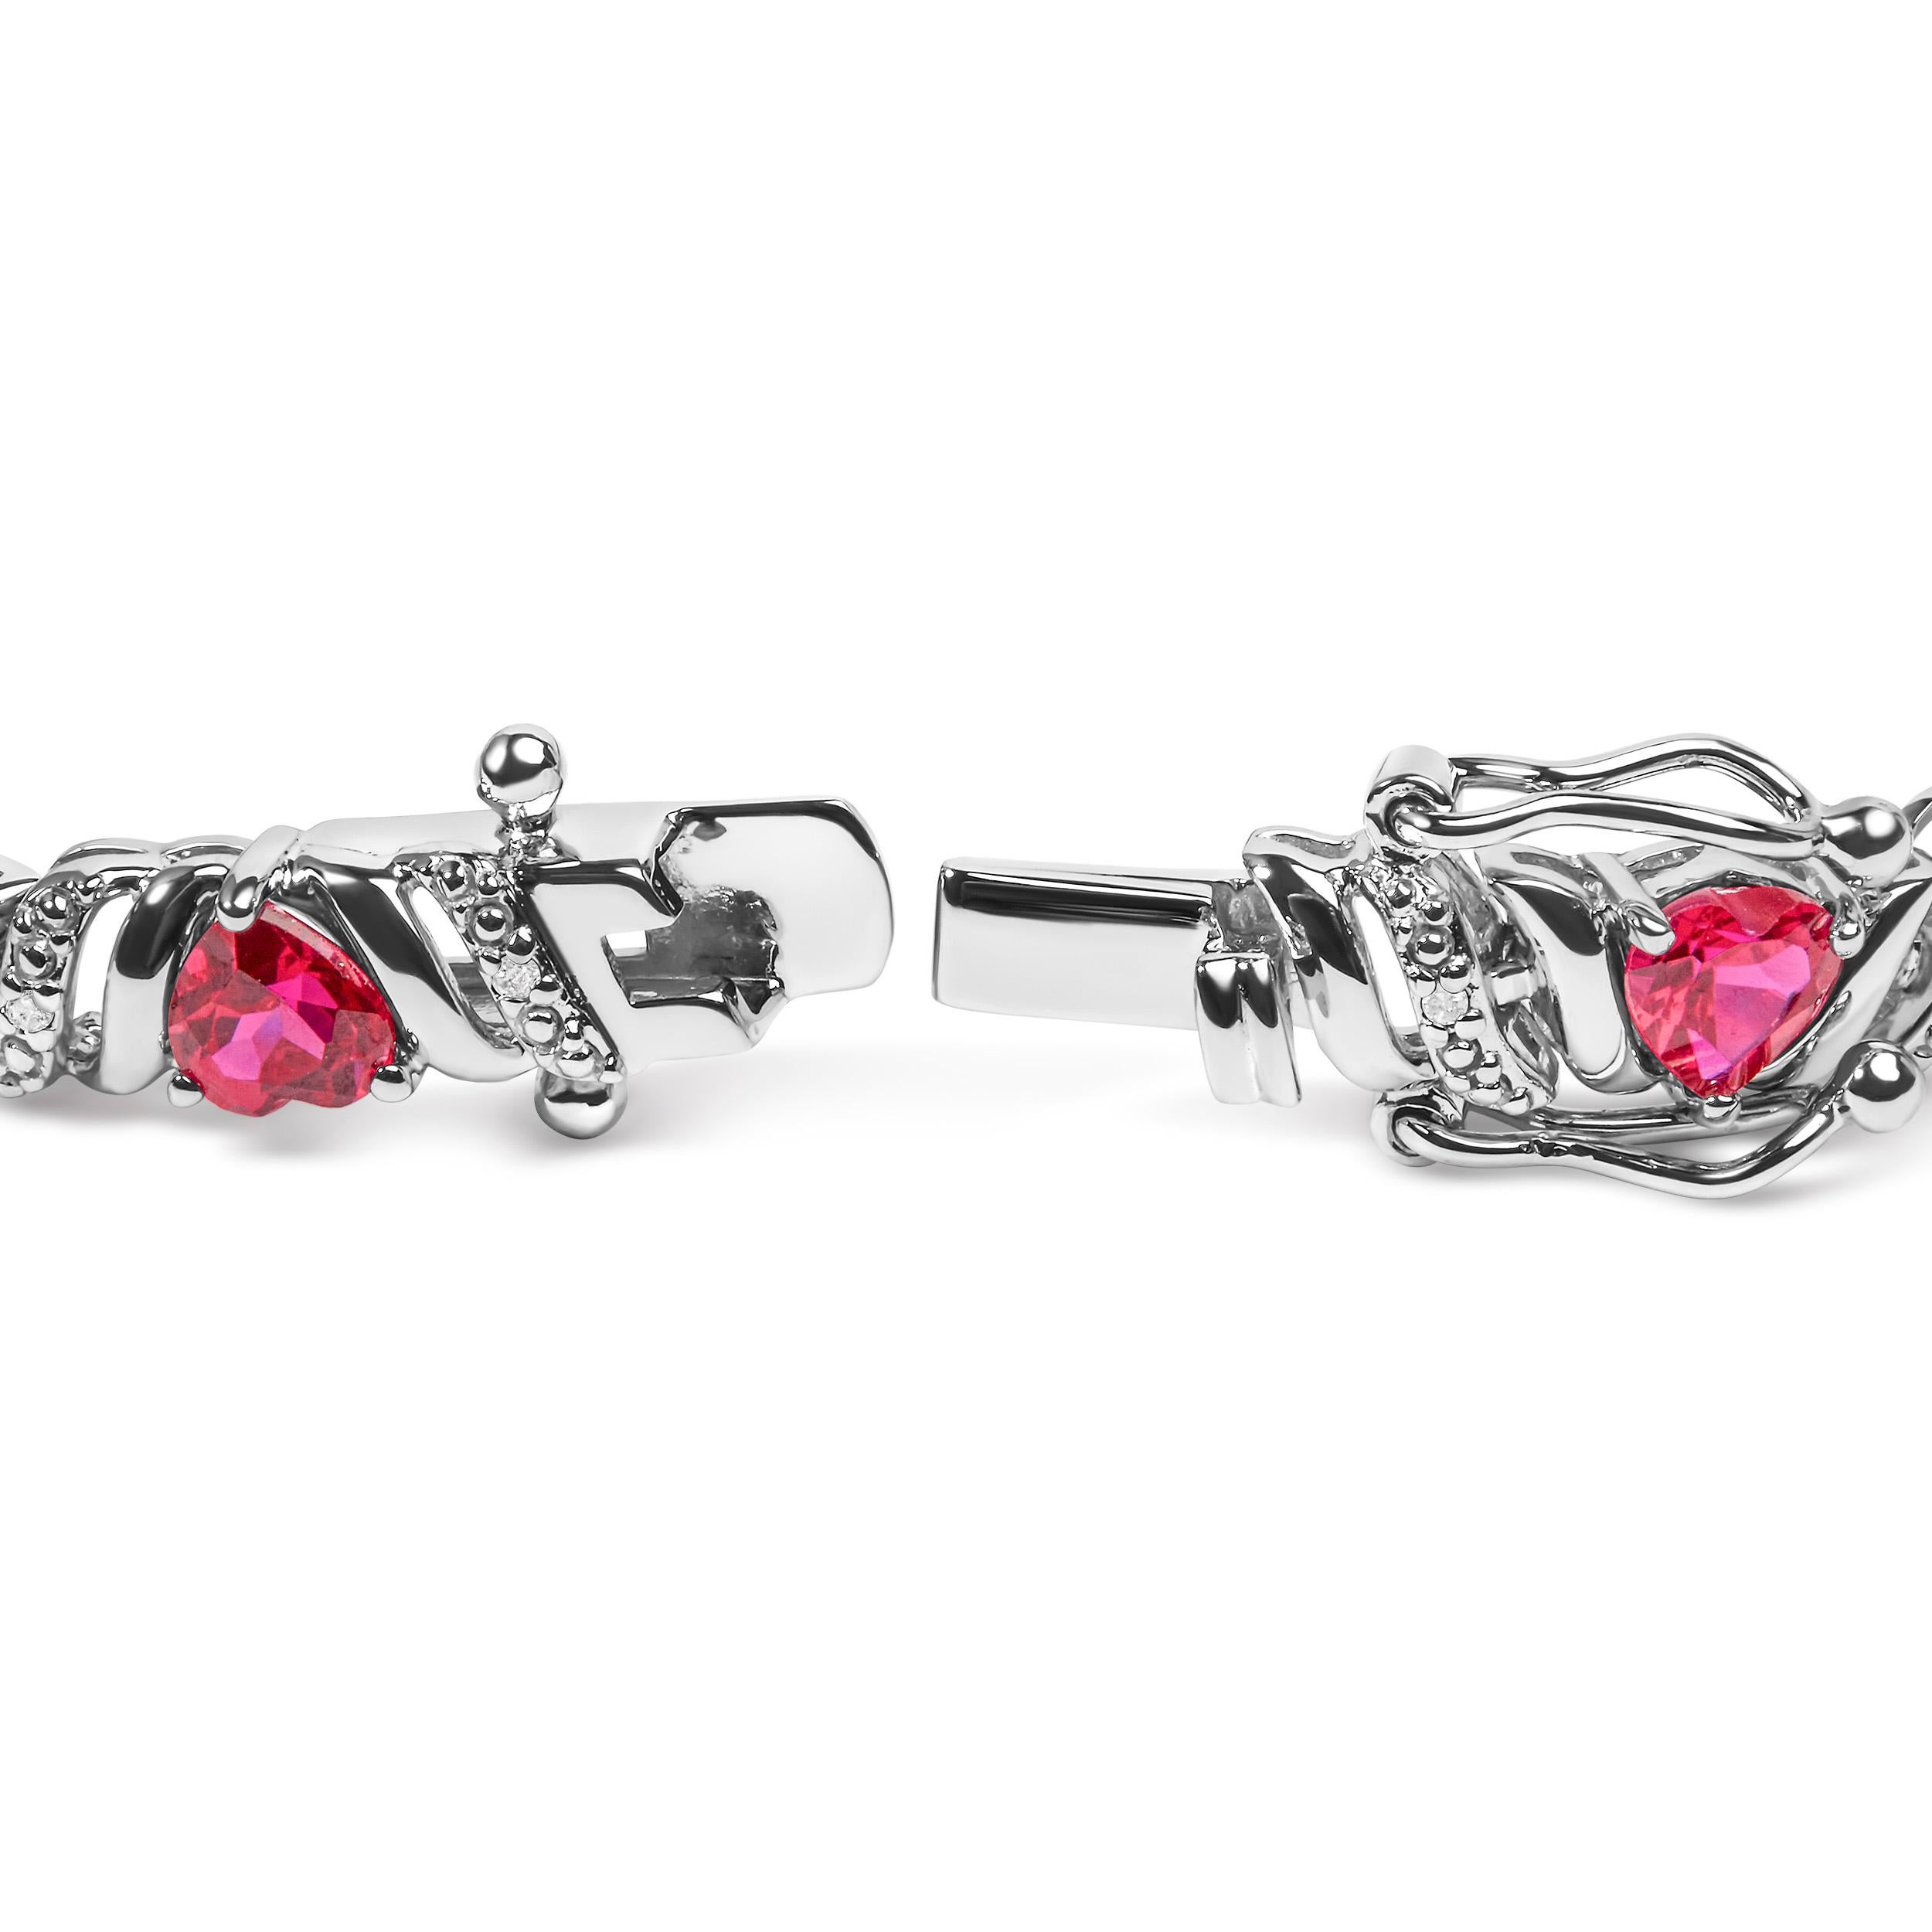 Indulge in the epitome of elegance with this exquisite .925 Sterling Silver Link Bracelet. Crafted with love, the heart-shaped Red Ruby gemstones exude passion and allure, captivating all who gaze upon them. The 17 dazzling Round White Diamond